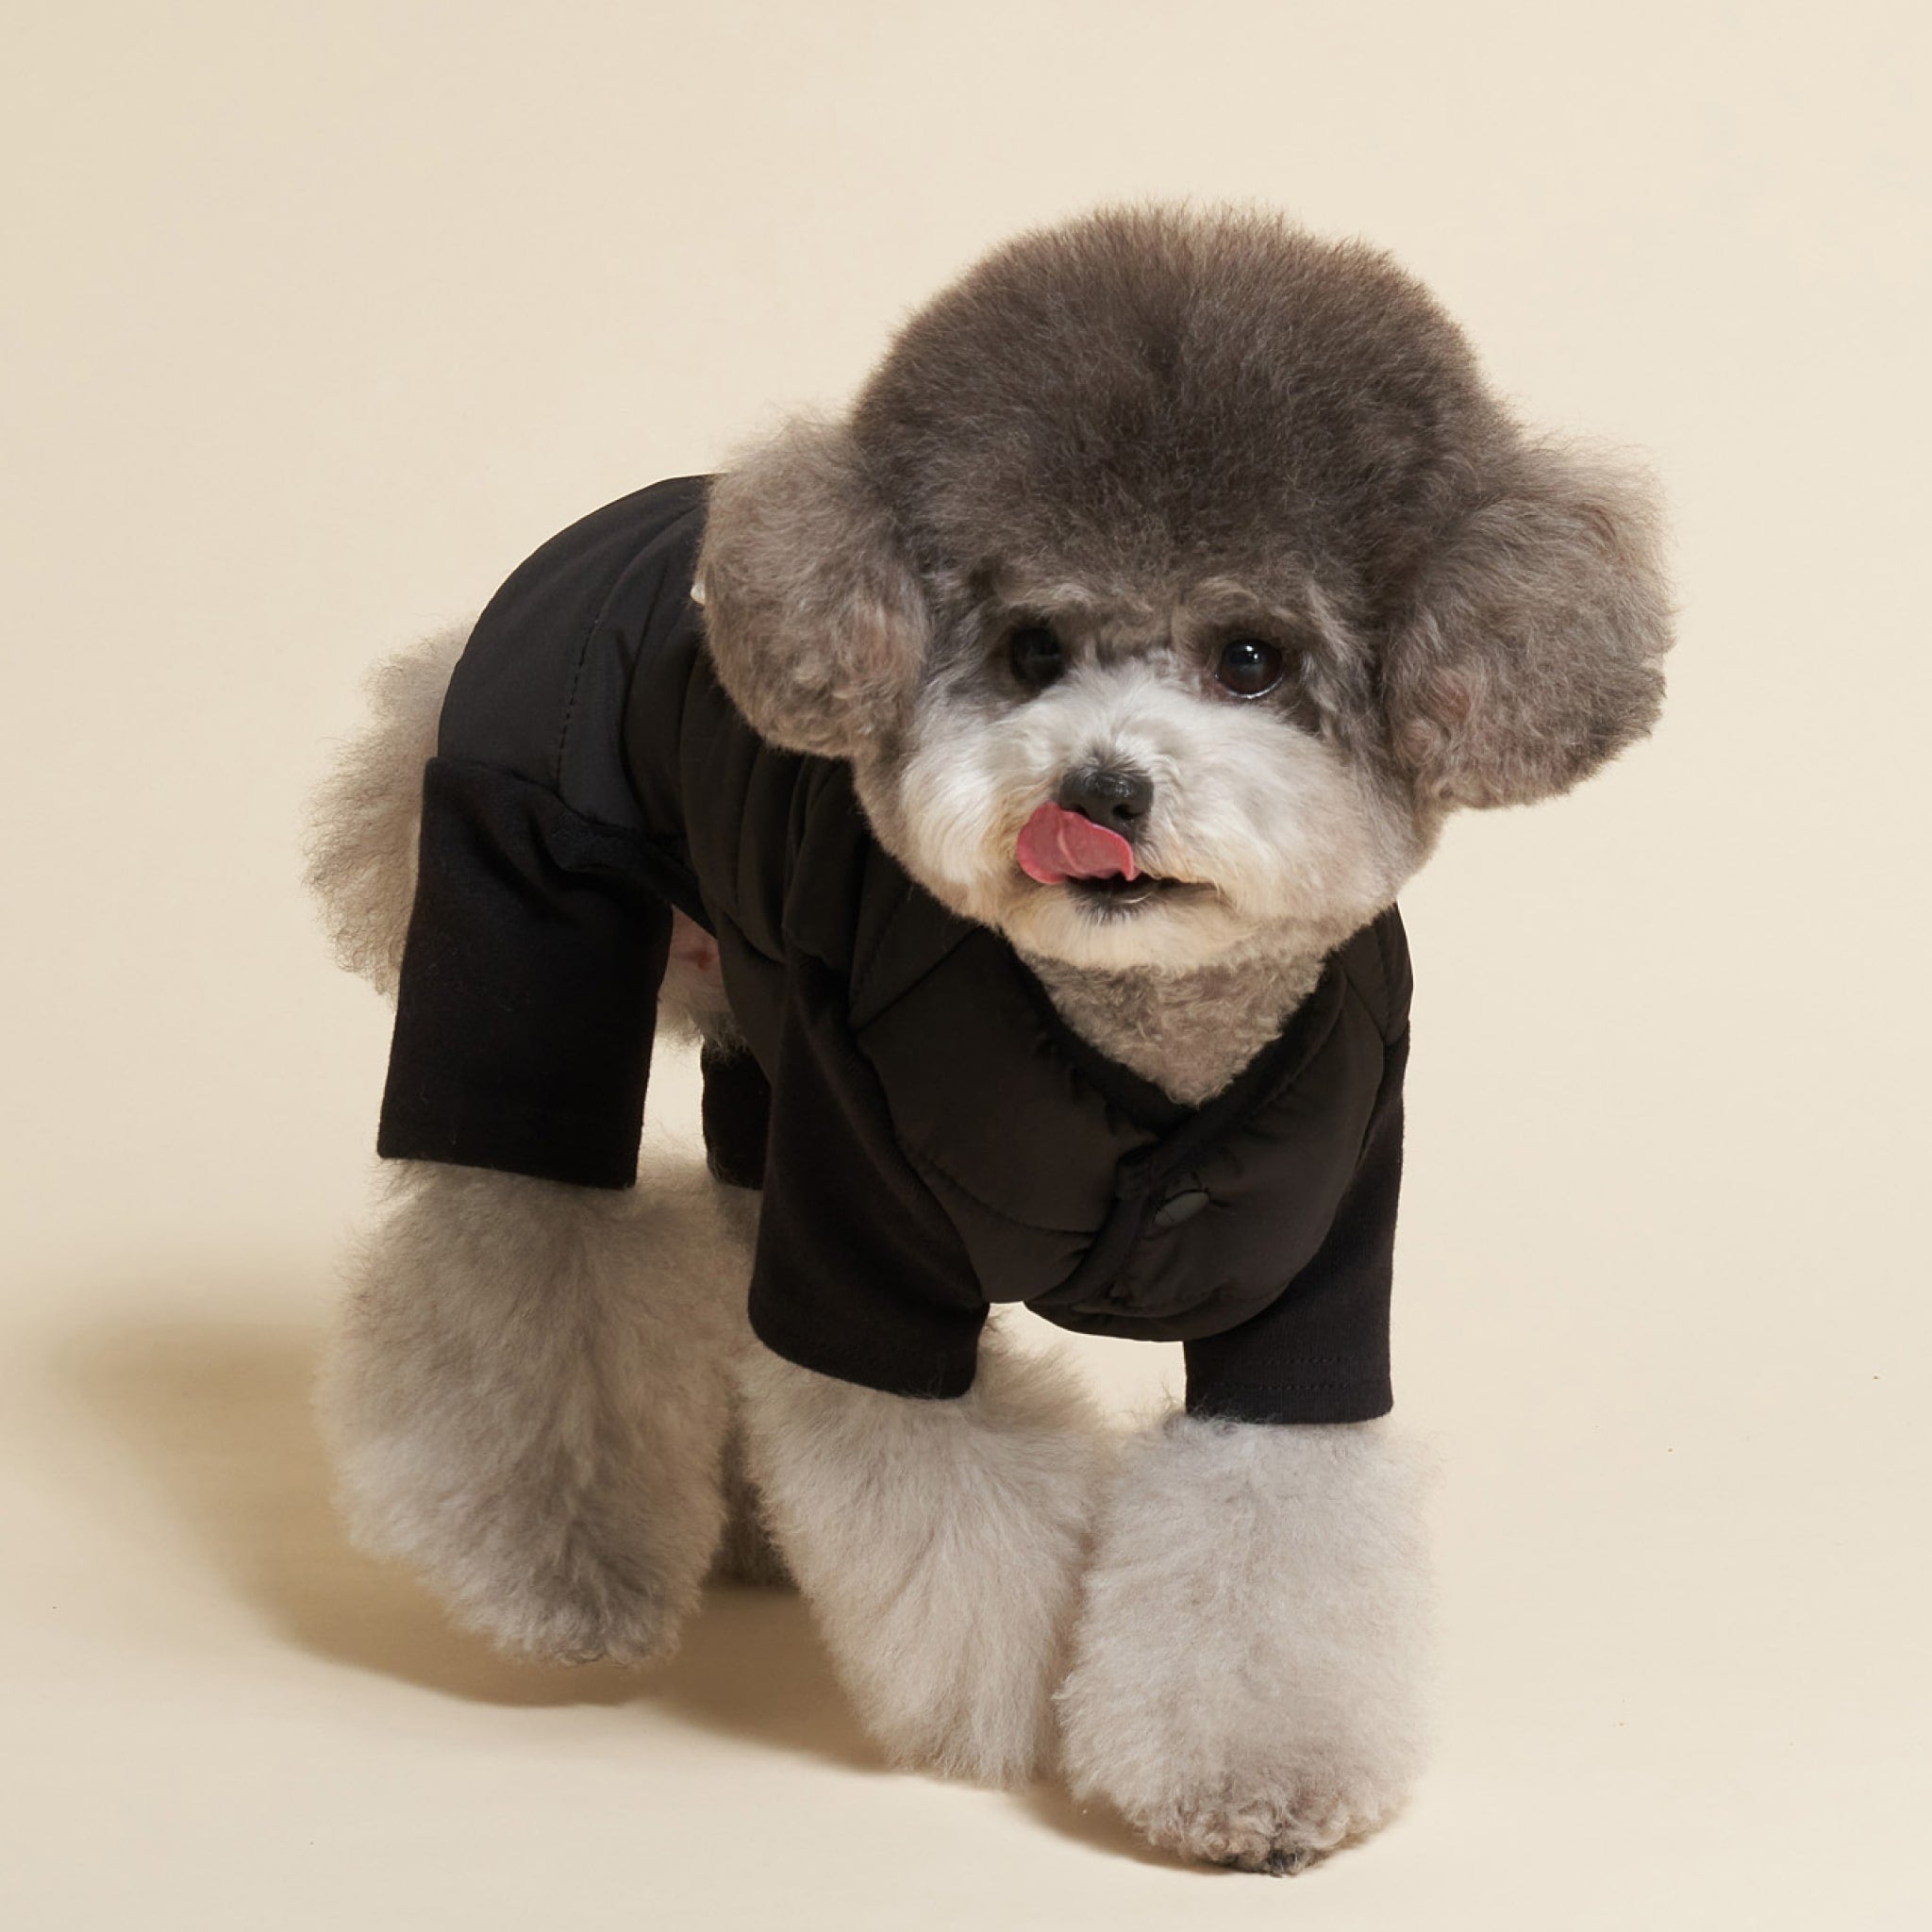 Dog wearing black padded bear jumpsuit while standing